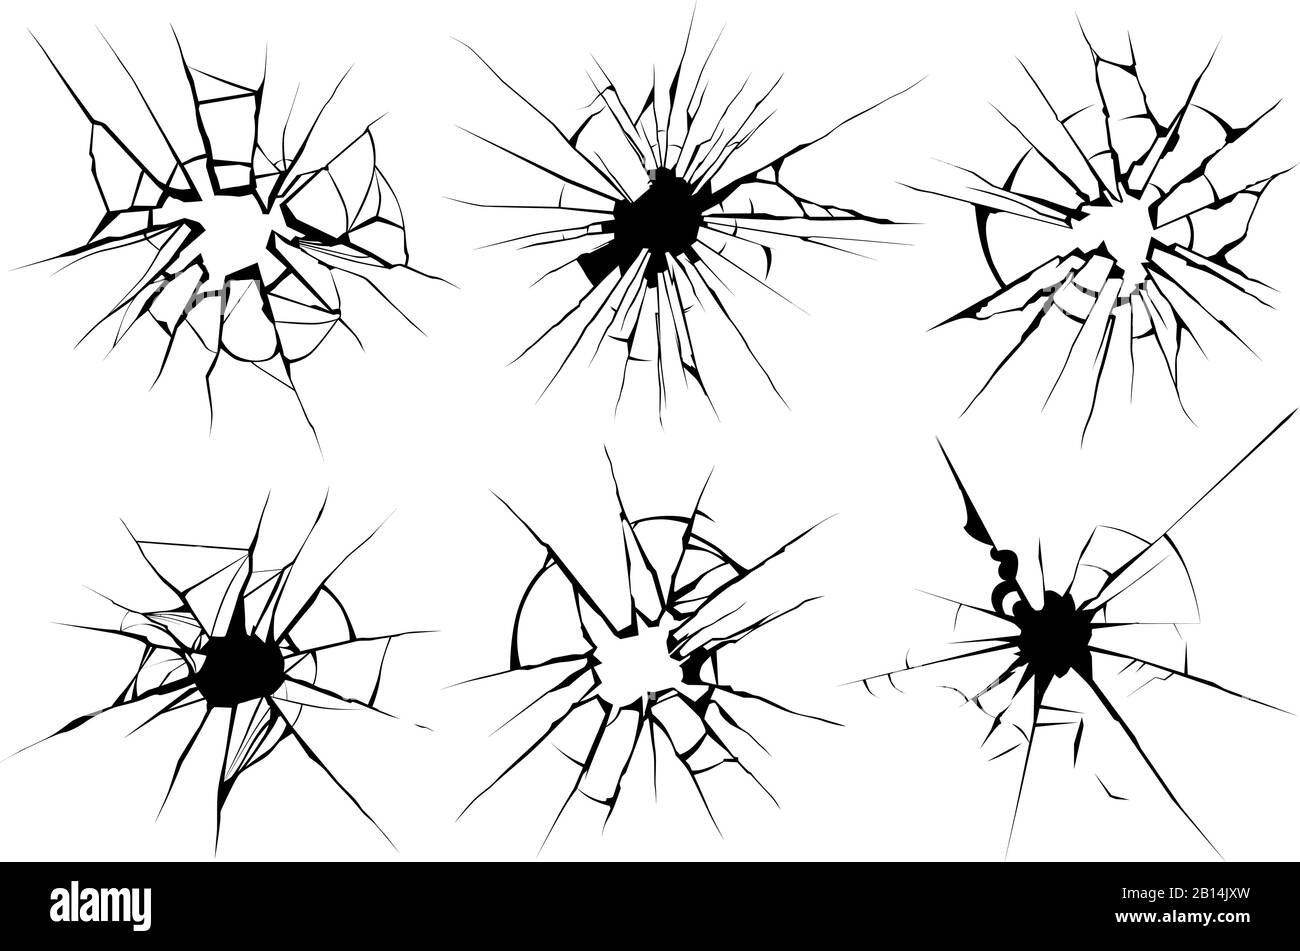 Cracked glass. Broken window, shattered glassy surface and break windshield glass texture silhouette vector illustration set Stock Vector